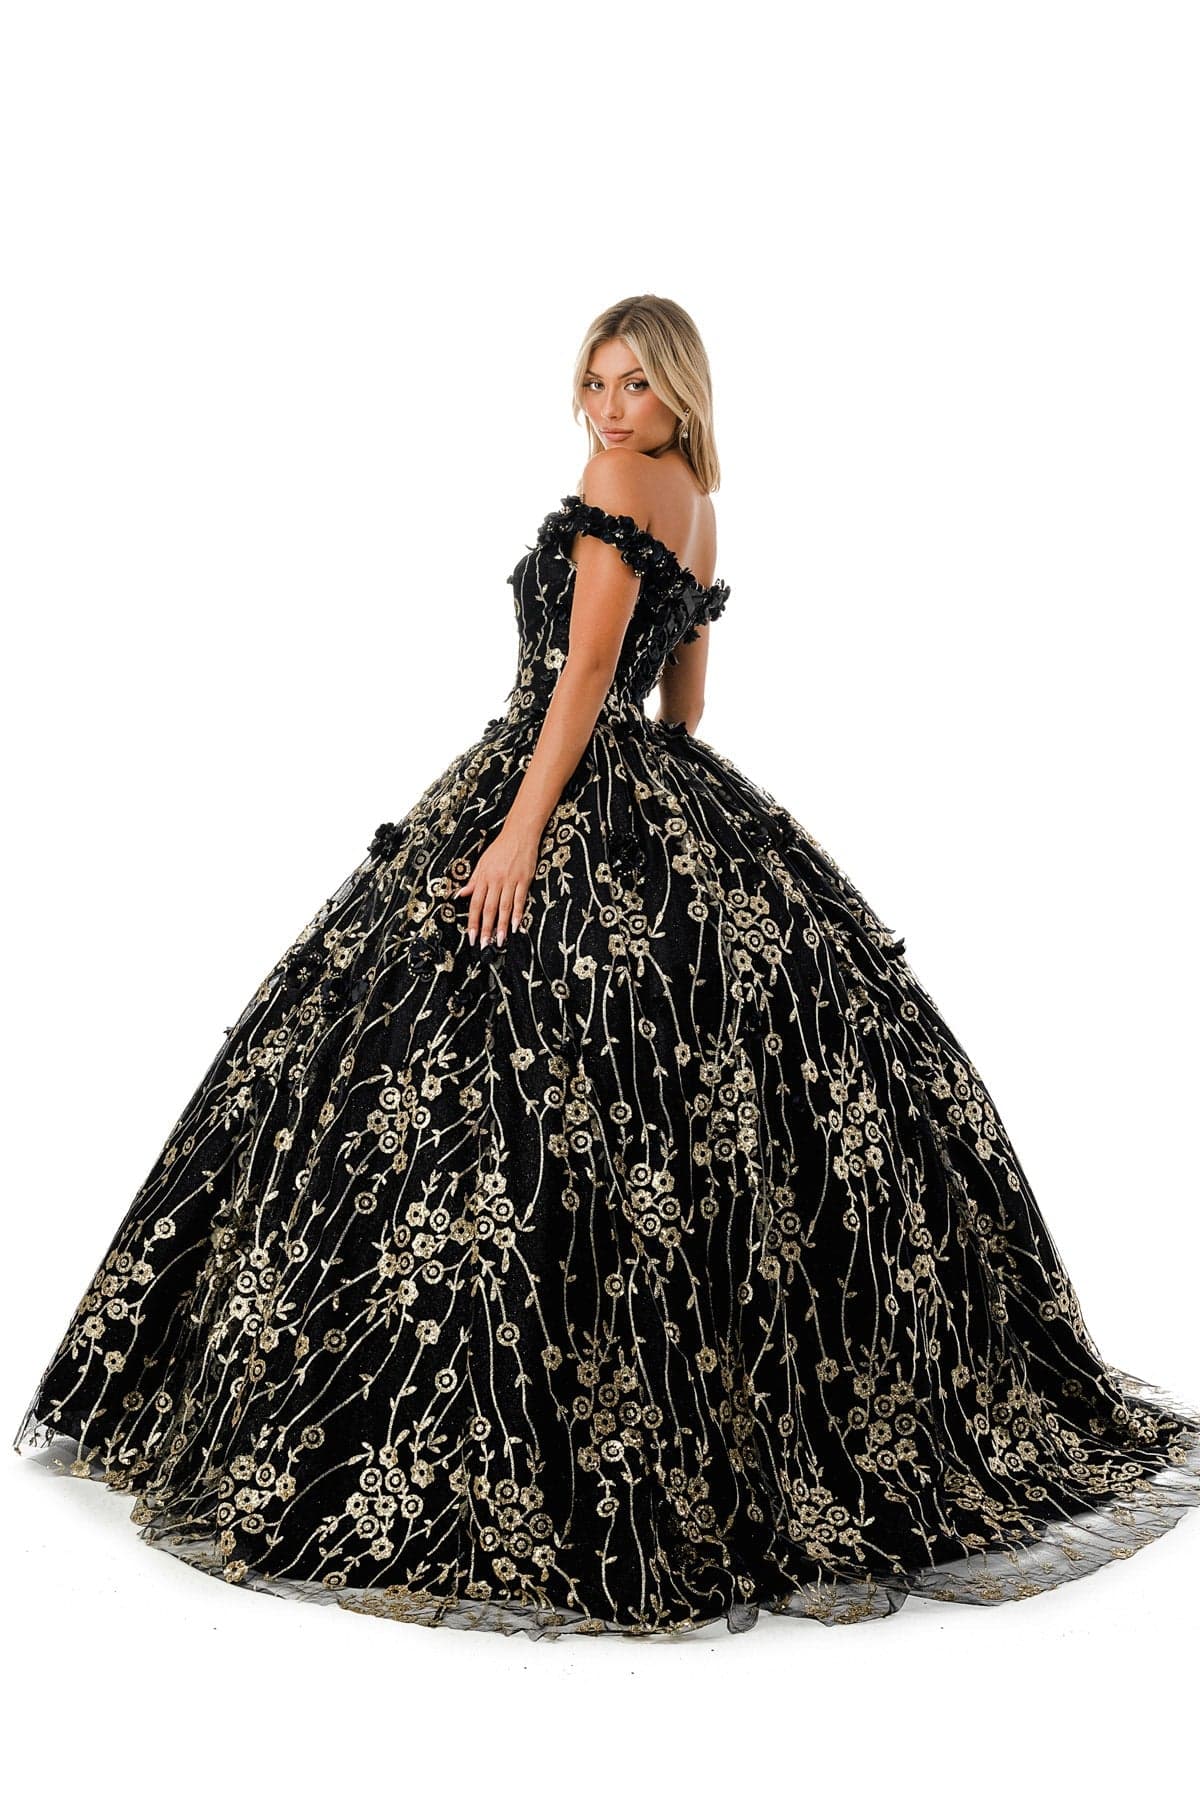 Aspeed L2766A Gorgeous Black & Gold Floral Inspired Quinceanera Dress - NORMA REED